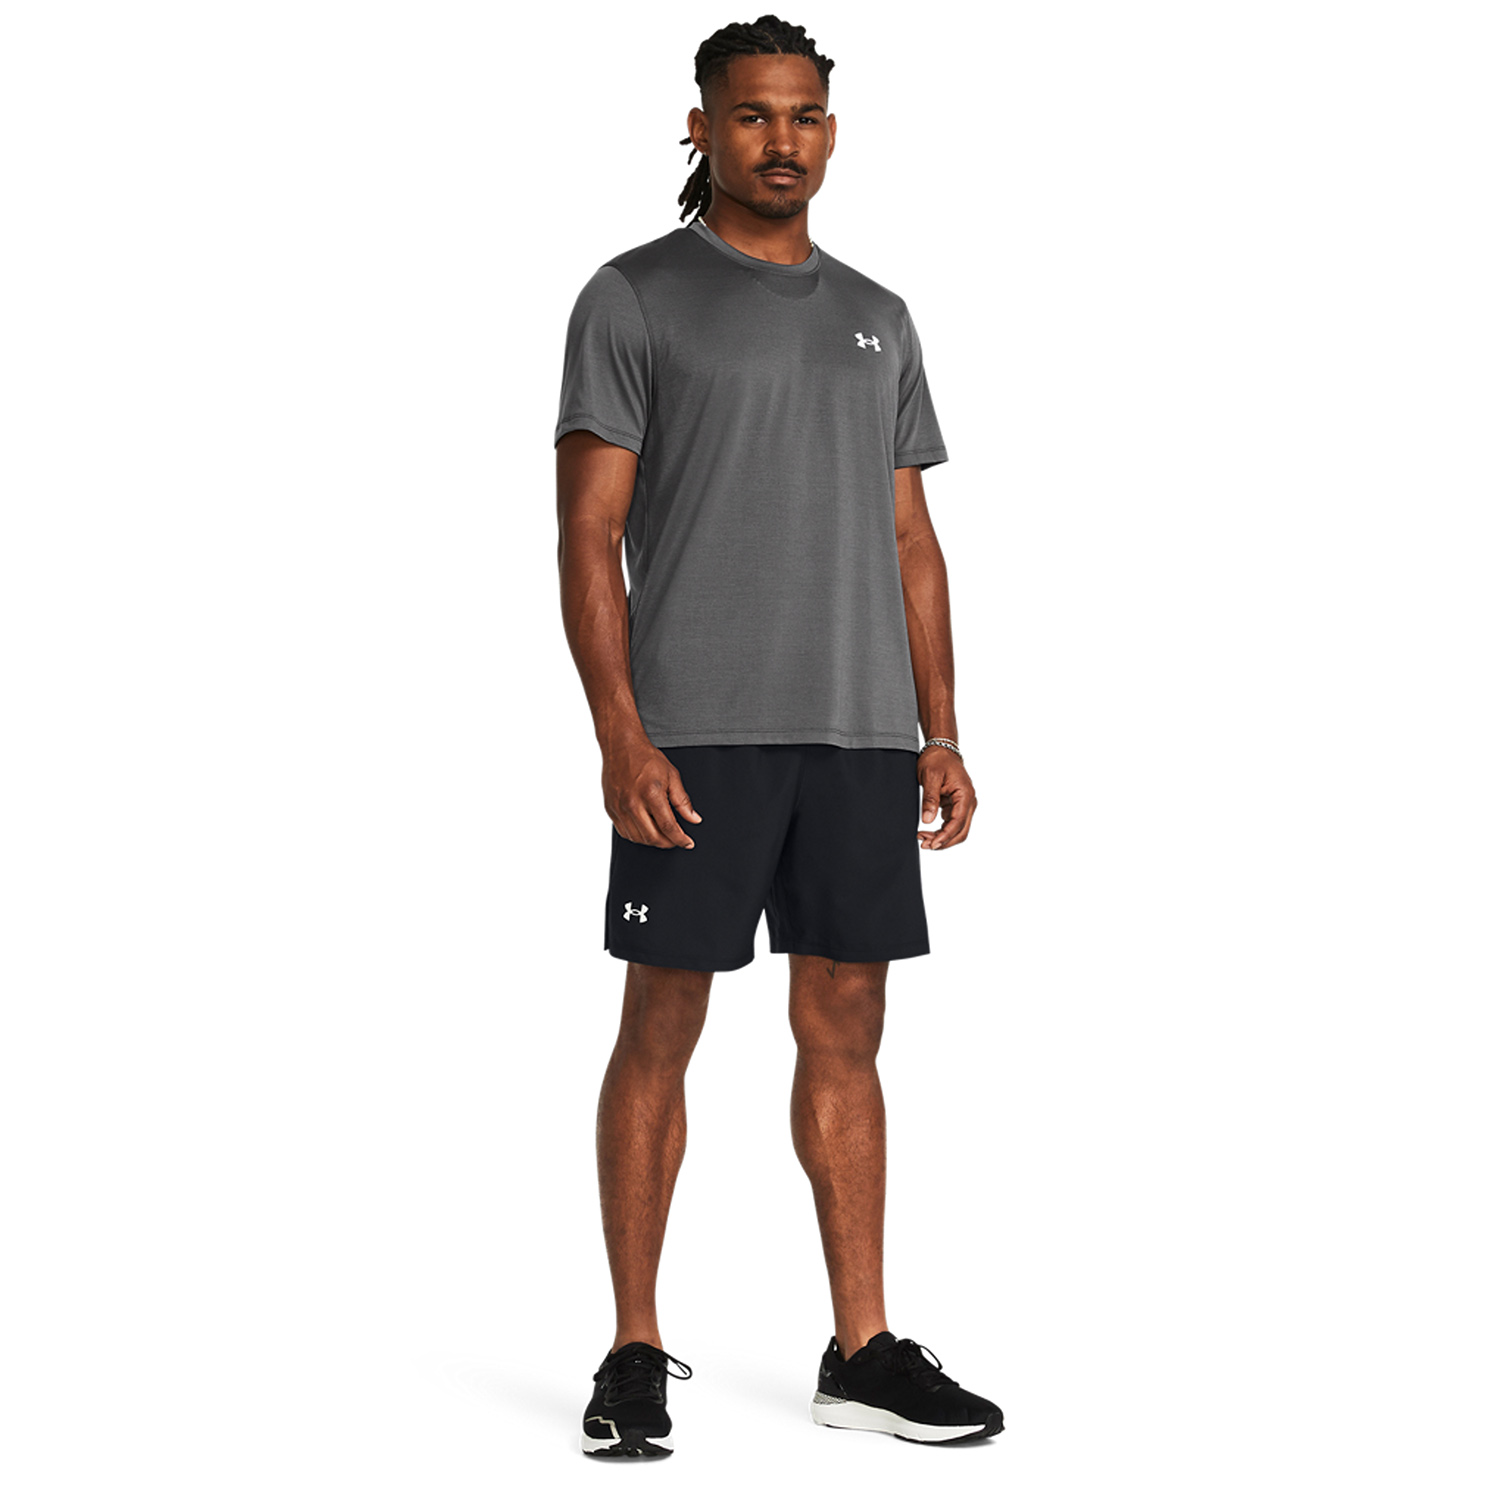 Under Armour Launch 7in Shorts - Black/Reflective